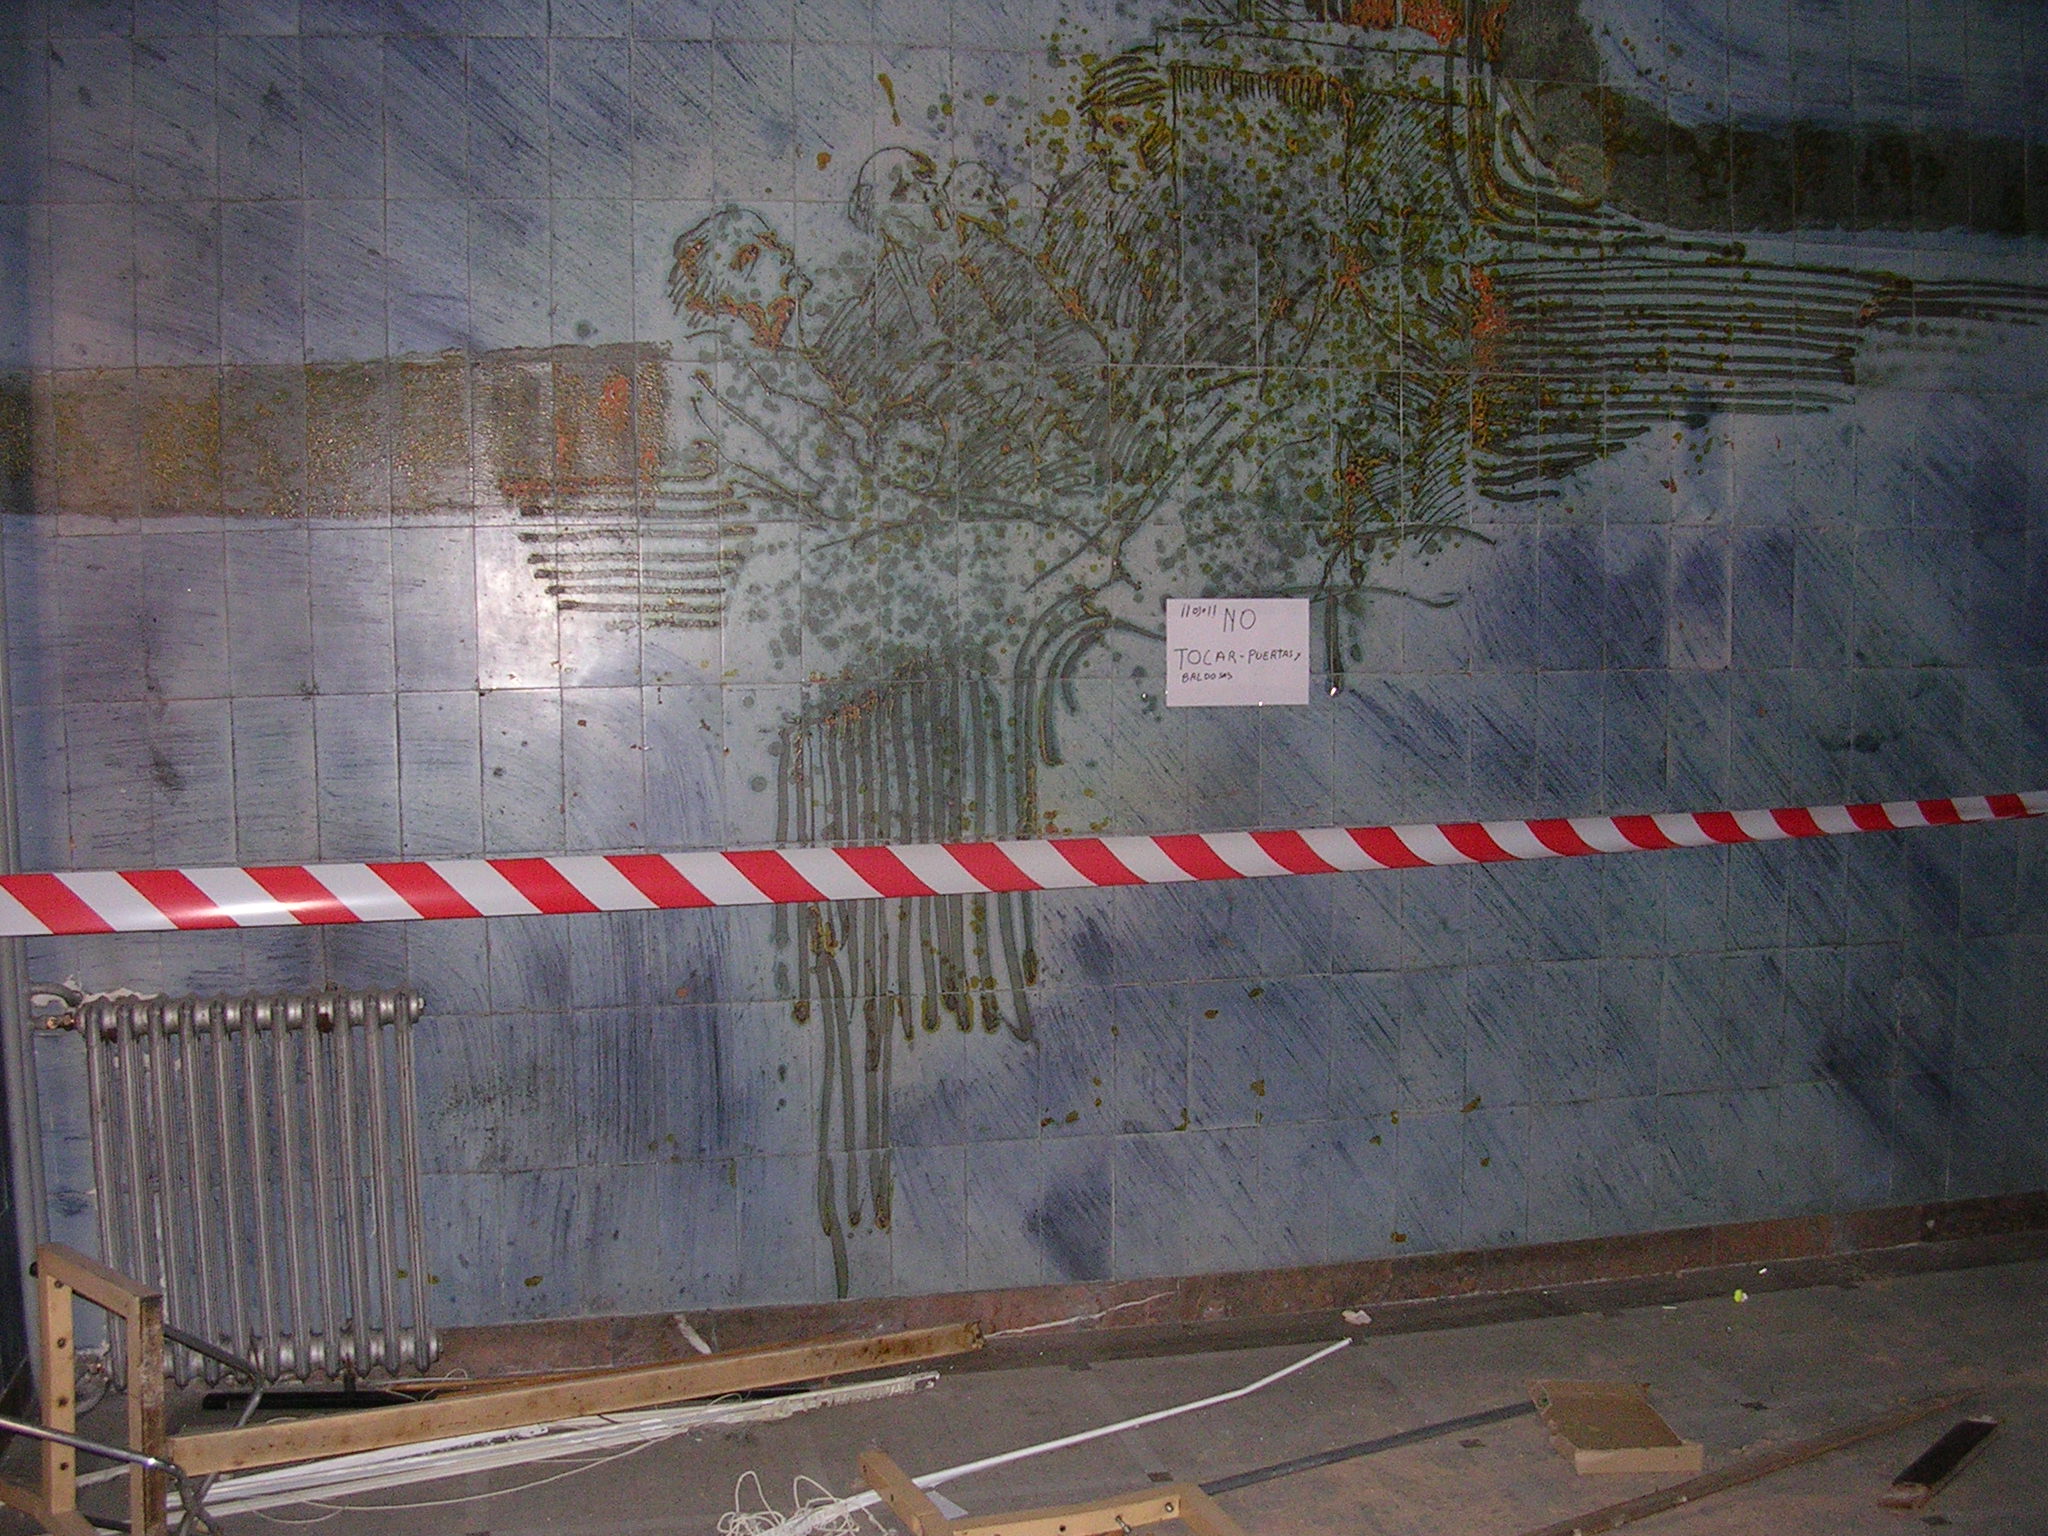 Mural by Ángel Grávalos dating to 1972 for which the panel had to be transferred